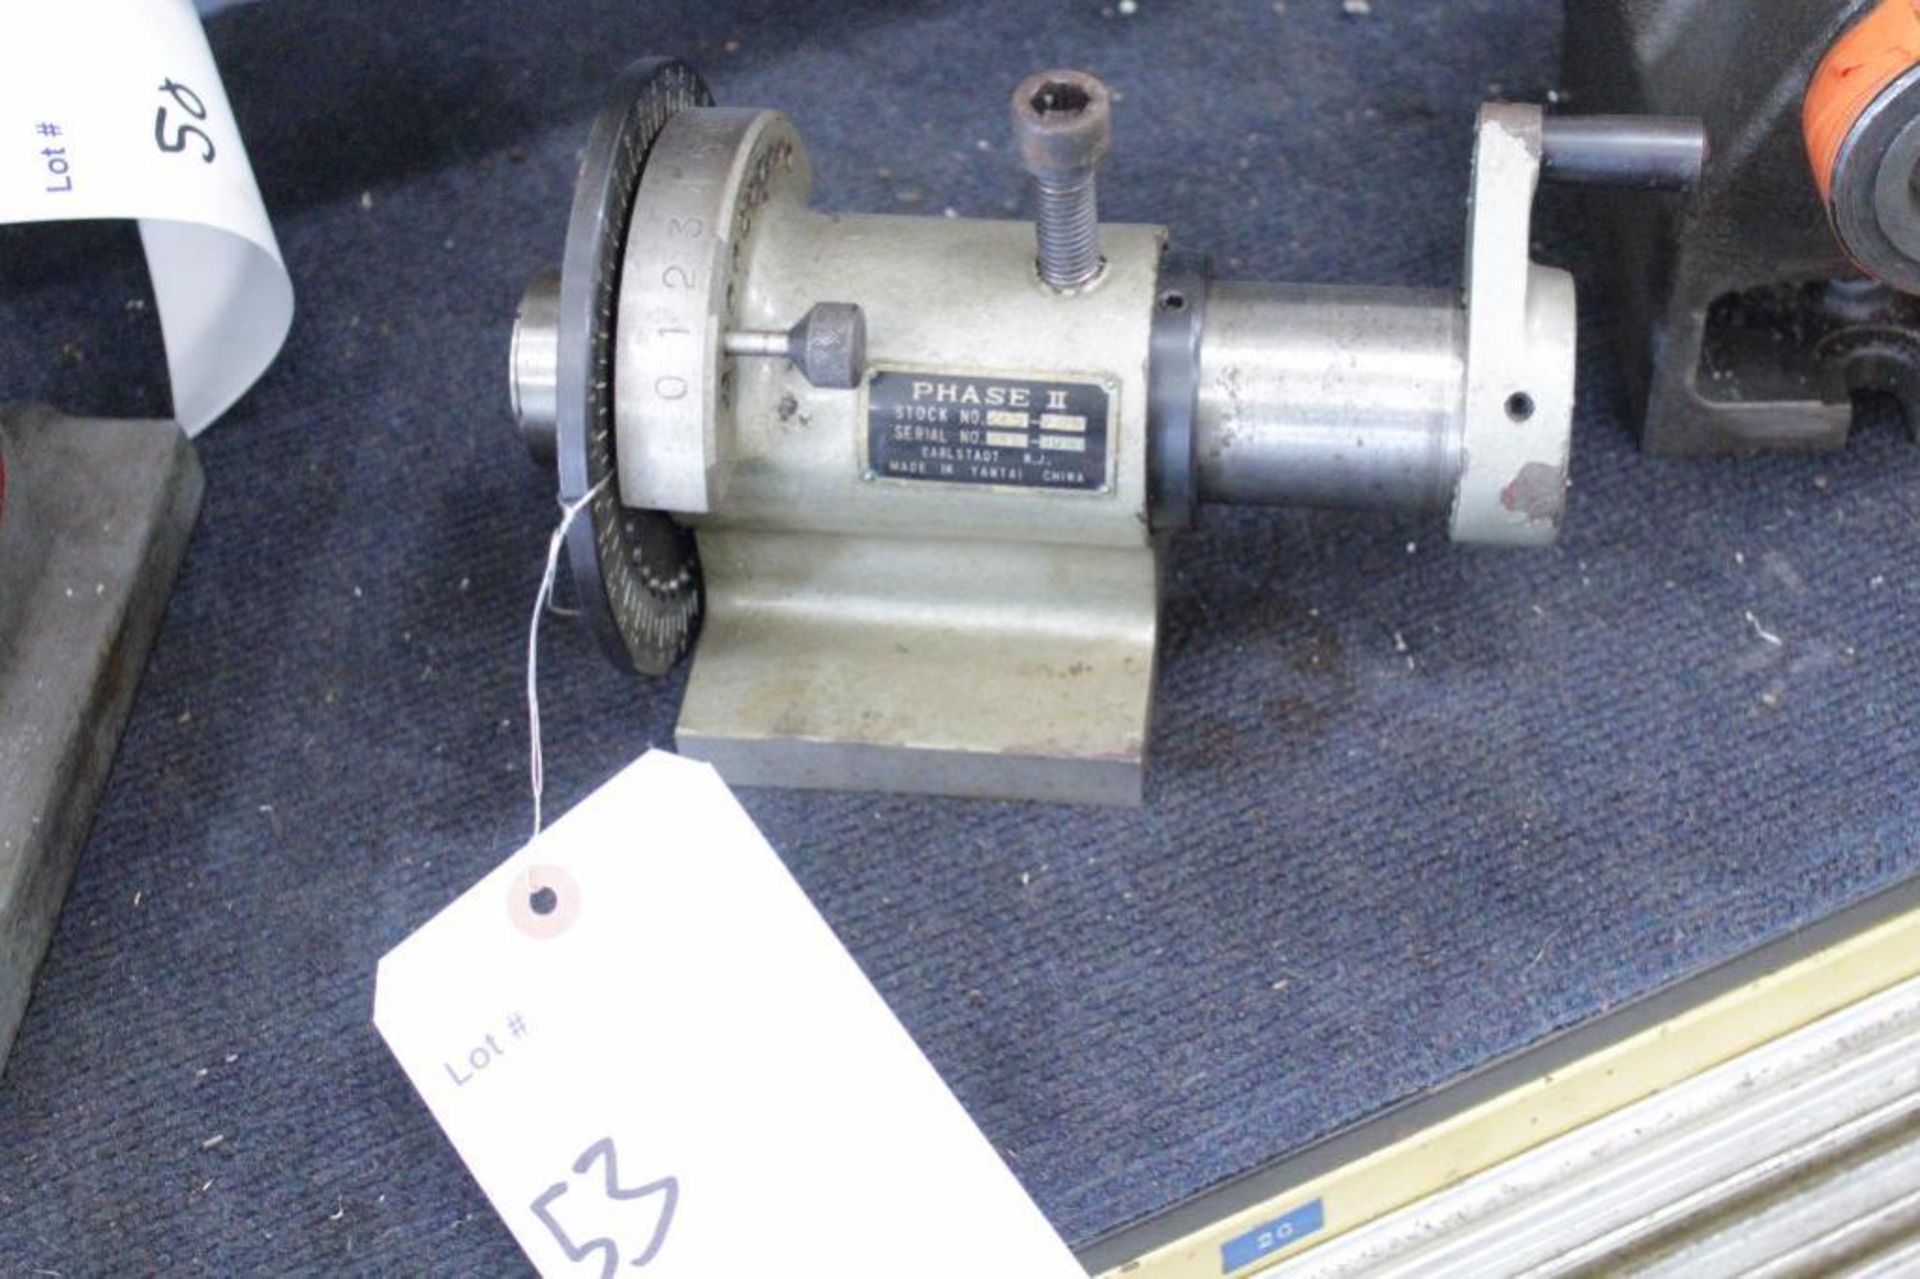 Phase II 225-204 5c collet indexer - Image 2 of 3